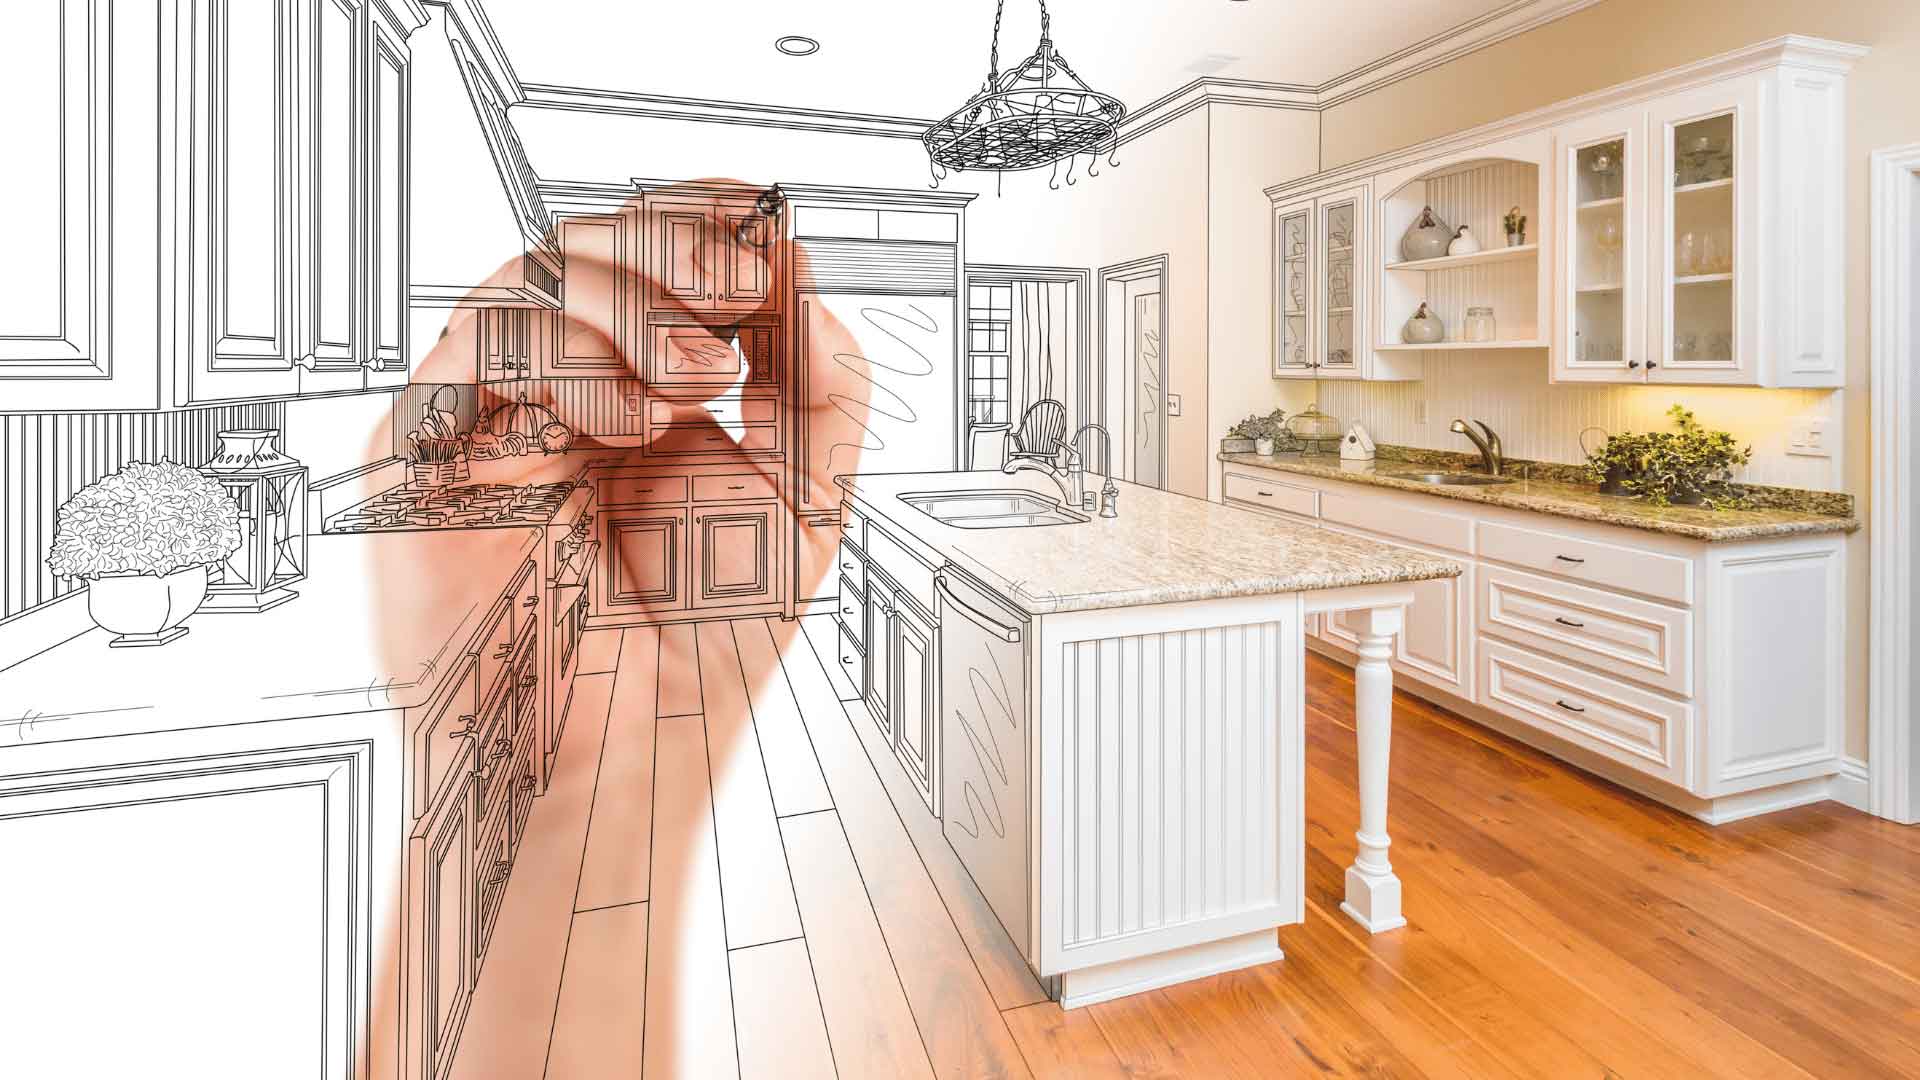 Flooring Options For Your Kitchen Remodel: Pros And Cons